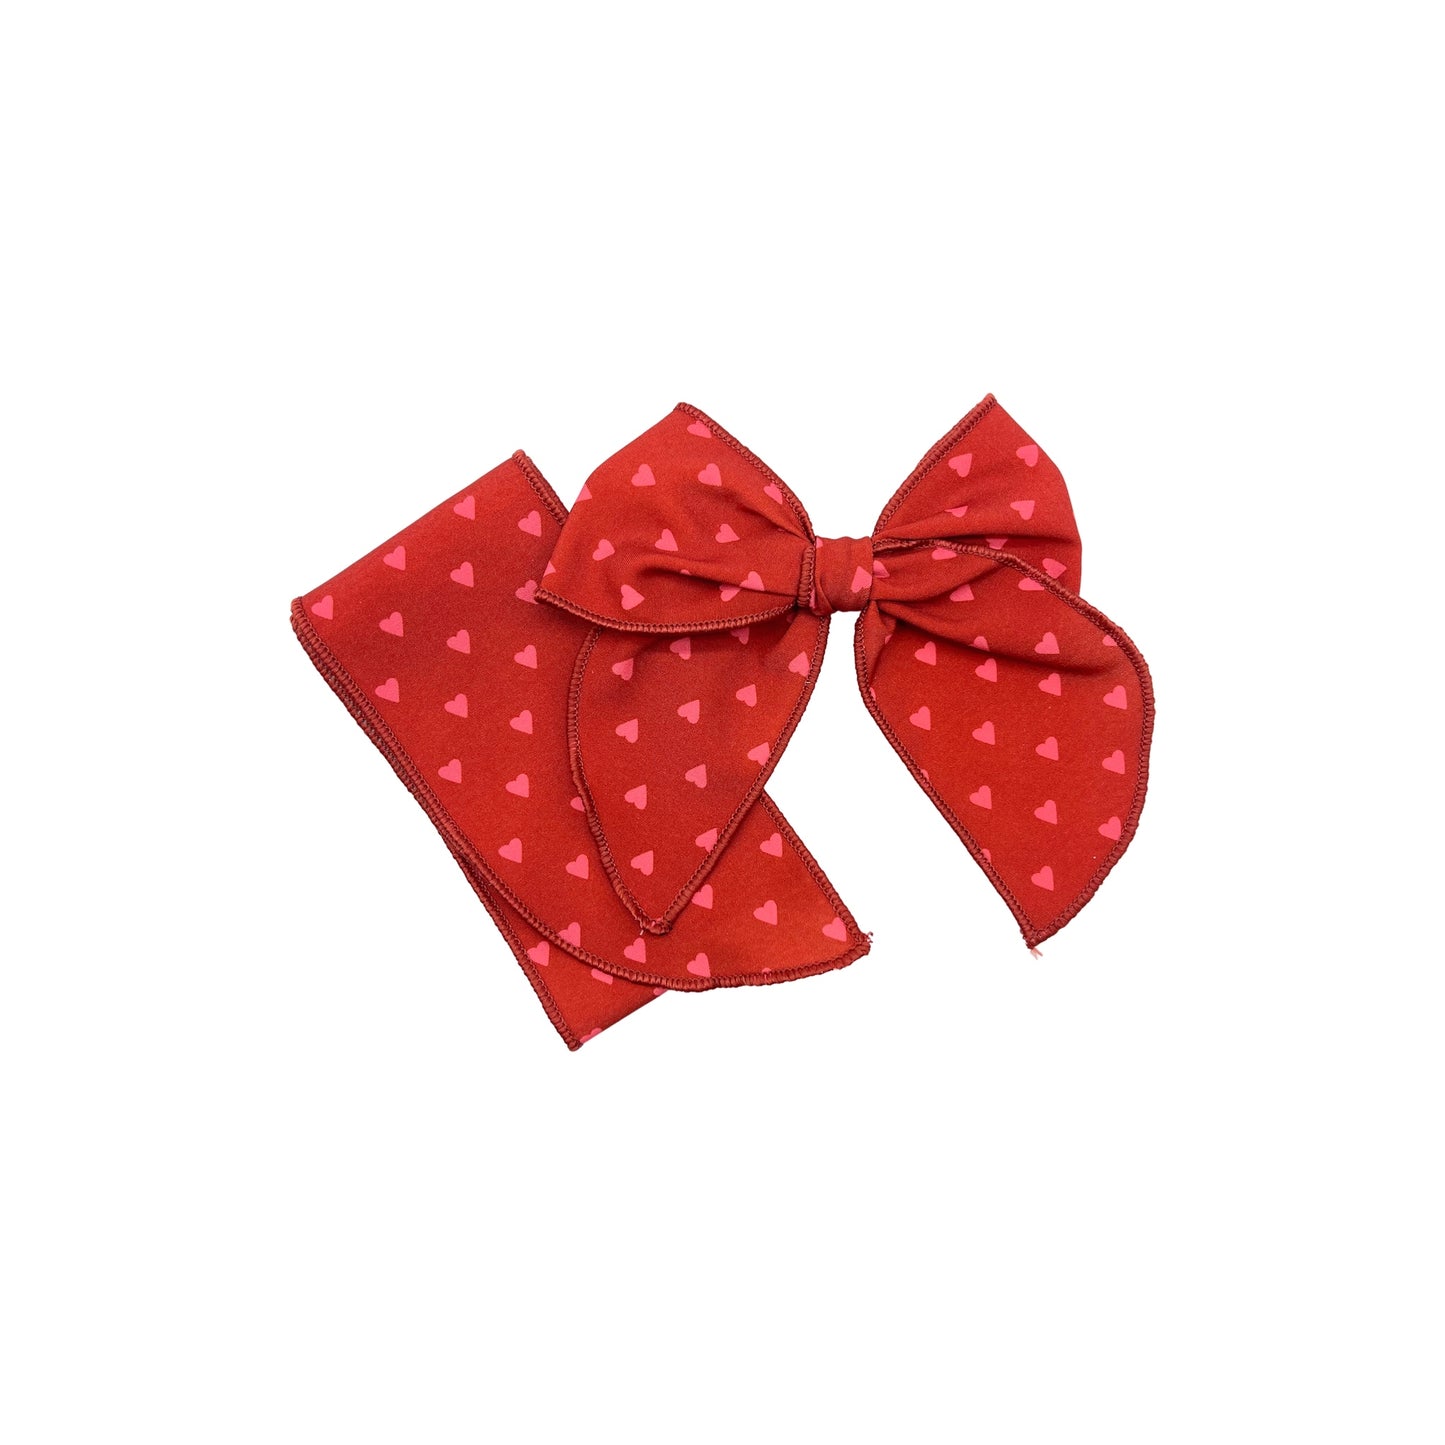 Tied and untied red Isabelle style fabric bow strip with pink heart pattern.